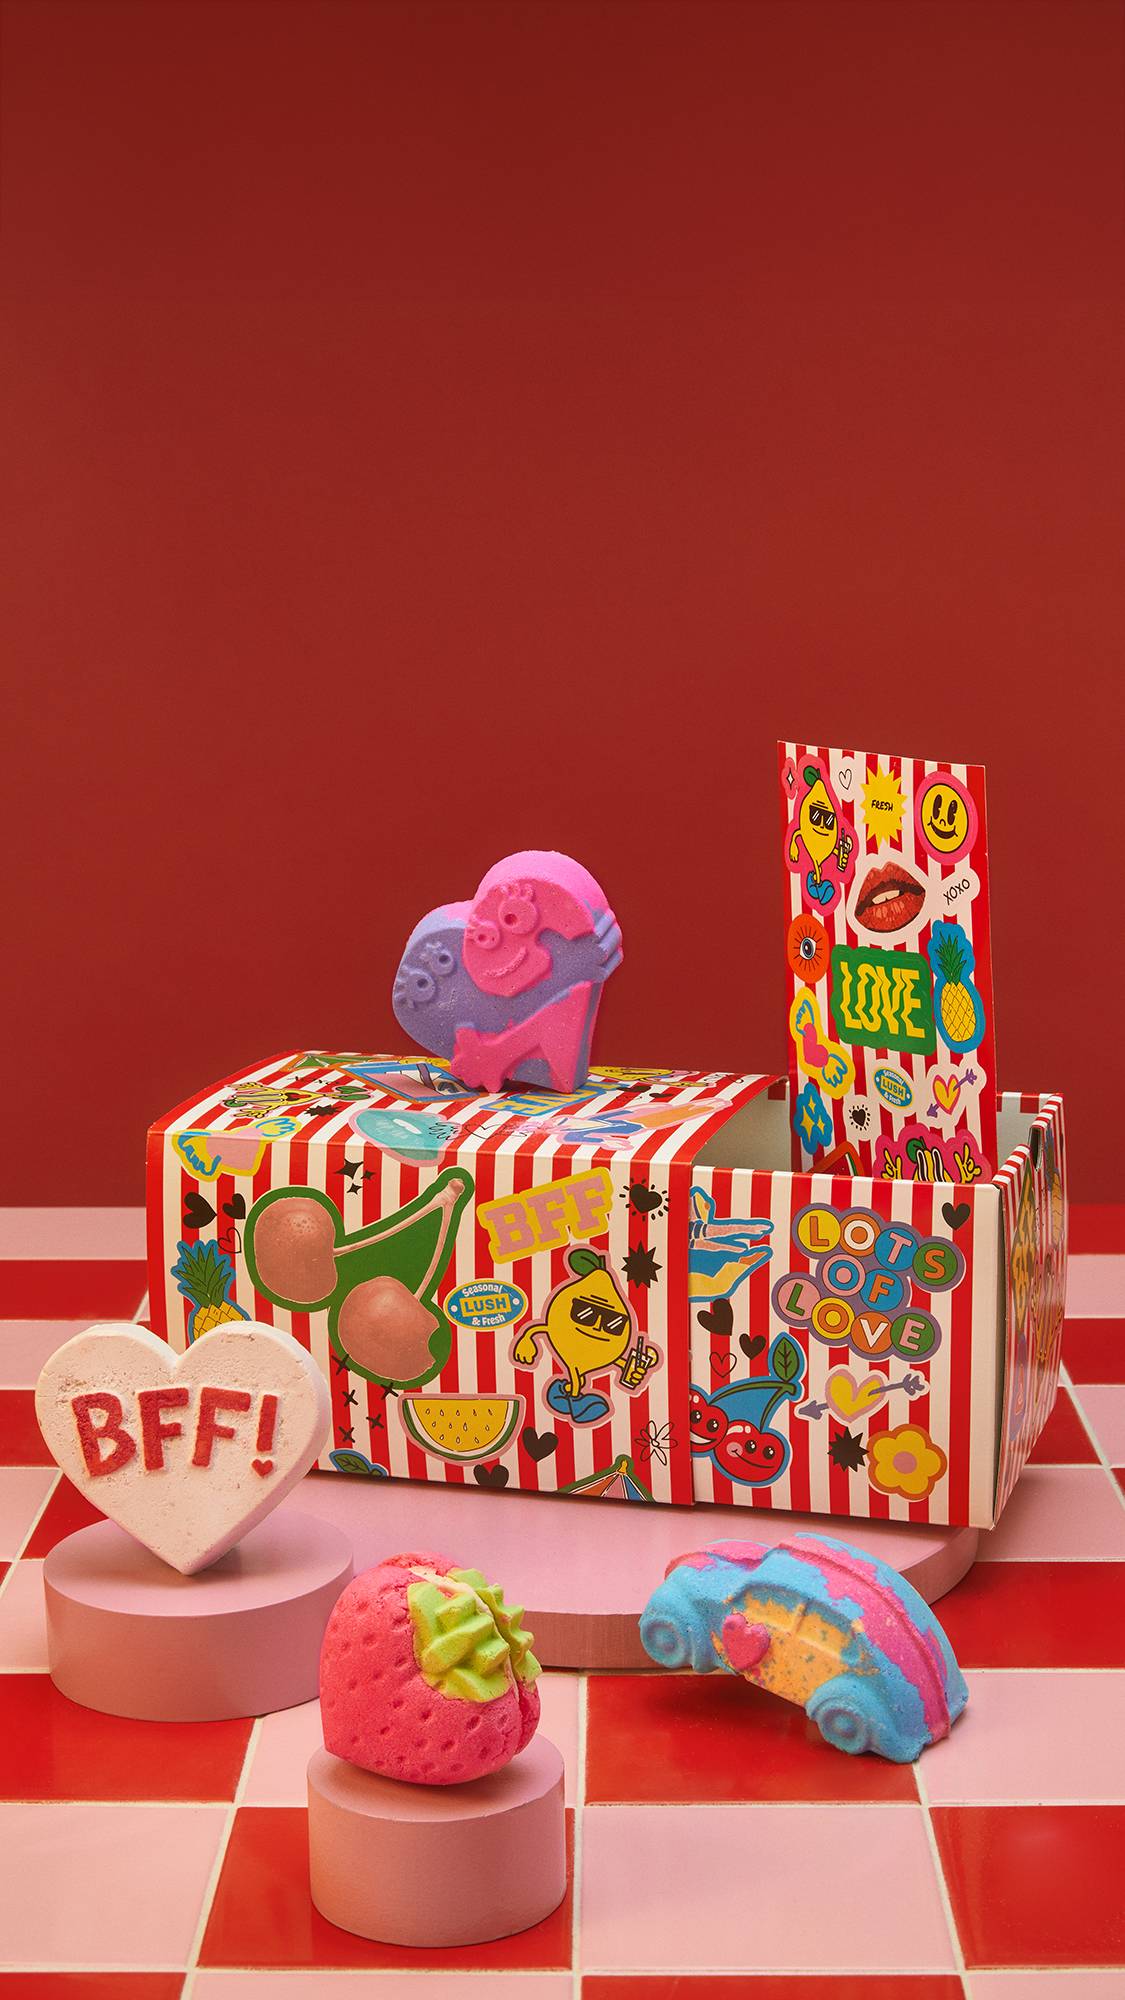 Image shows a red background with tiled flooring. On top of three small pedestals sits the BFF gift box with 4 bath products and a gift card. 